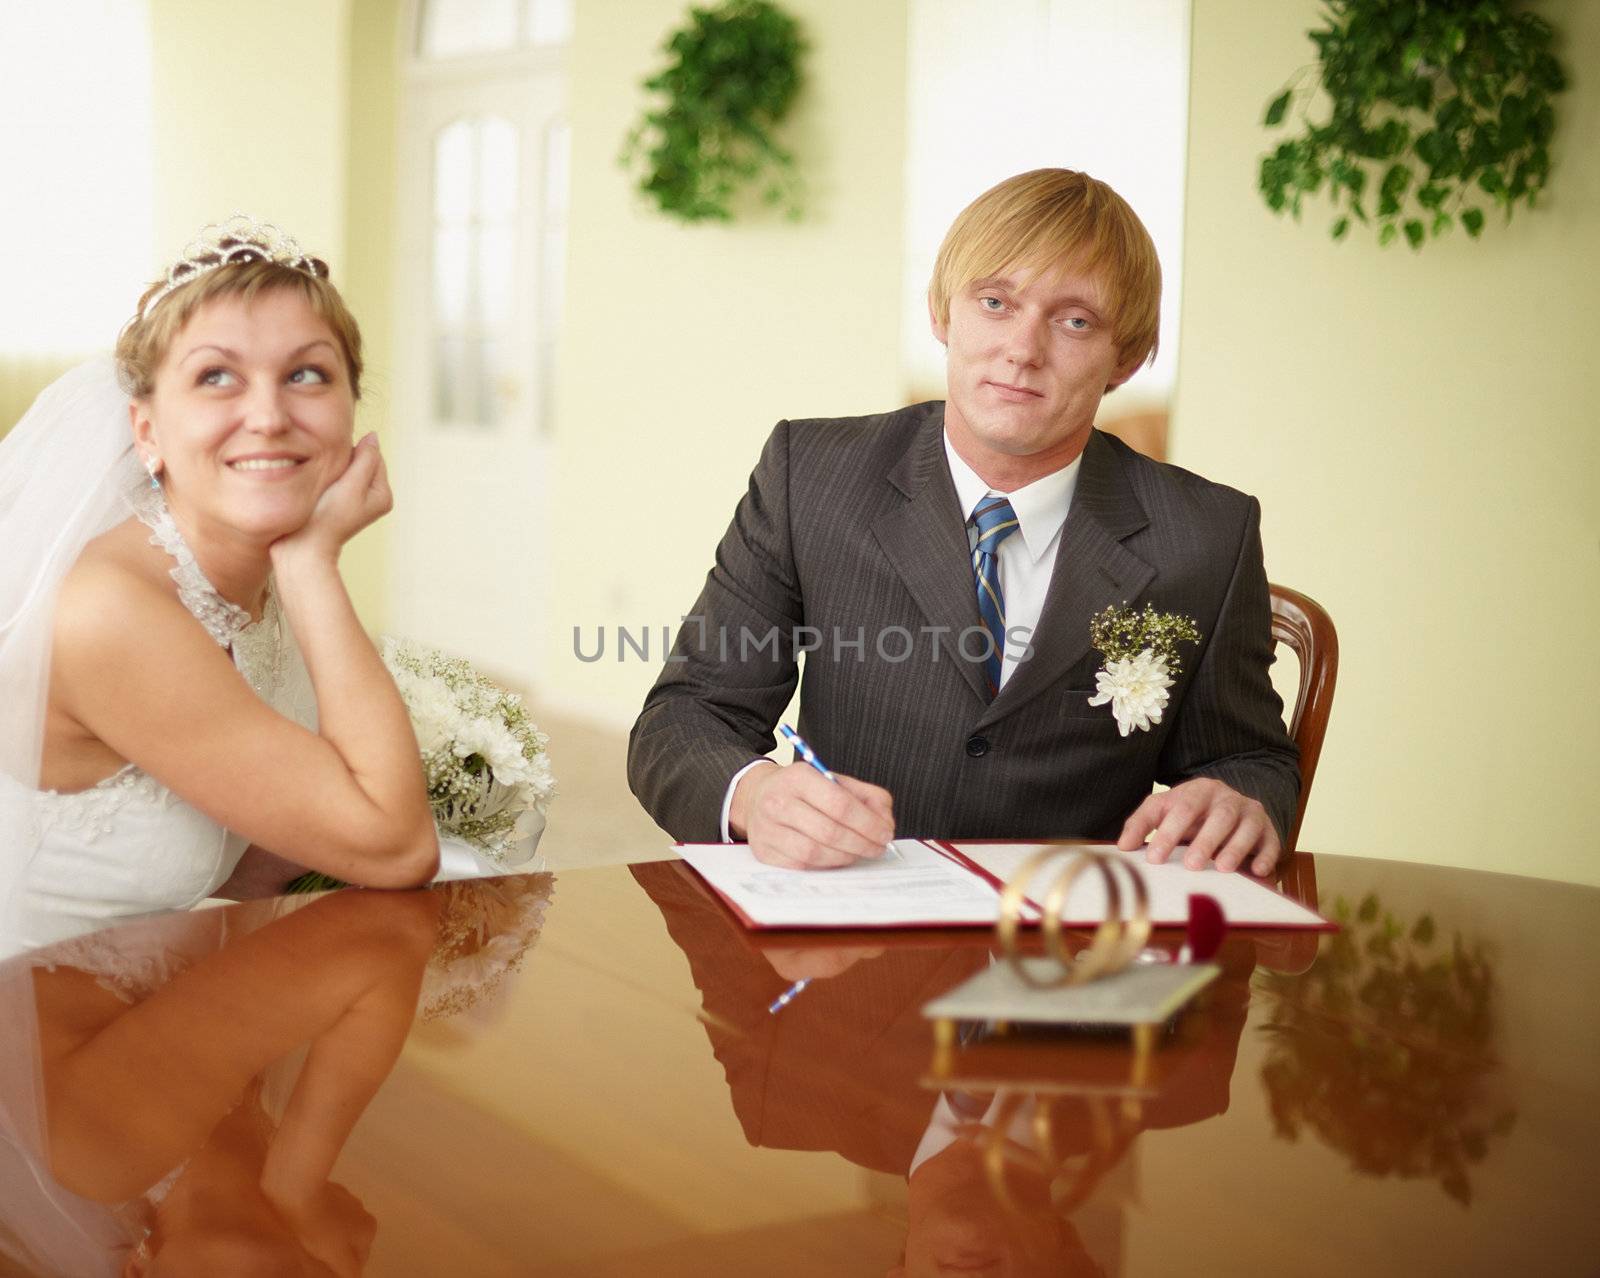 Registration of marriage in a festive atmosphere